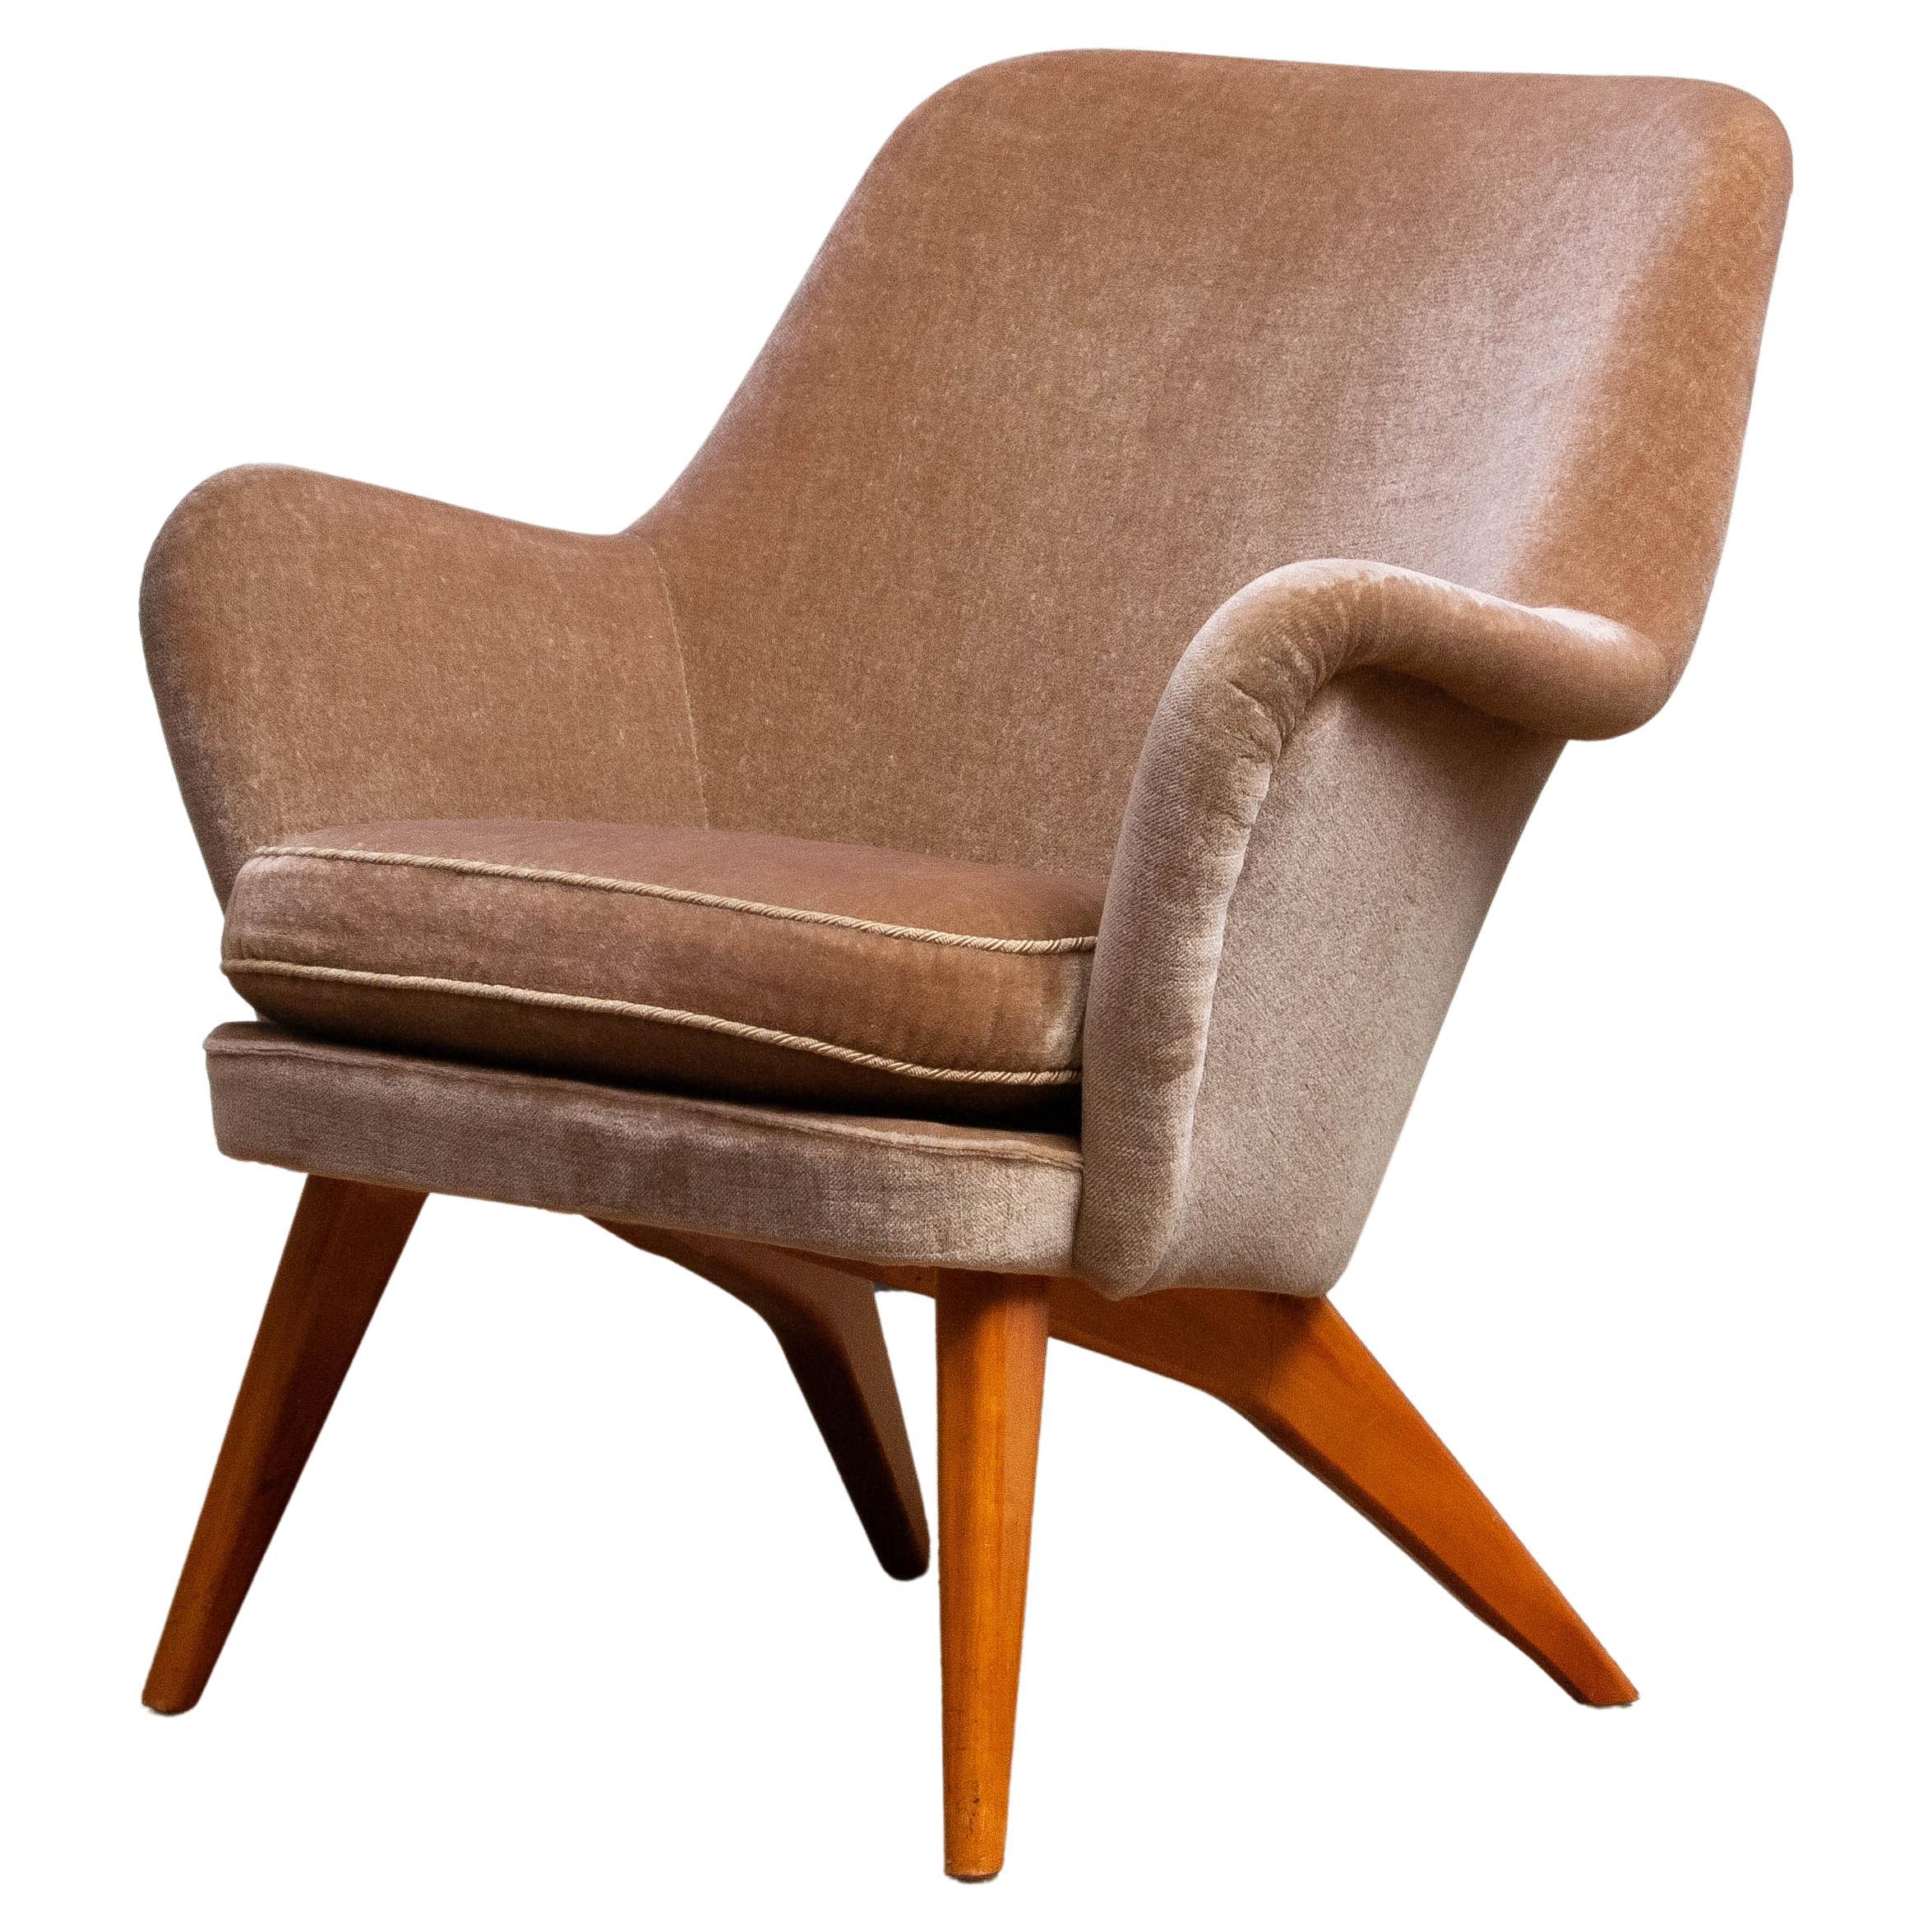 1950s Pedro Chair by Carl Gustav Hiort af Ornäs for Puunveisto Oy-Trasnideri For Sale